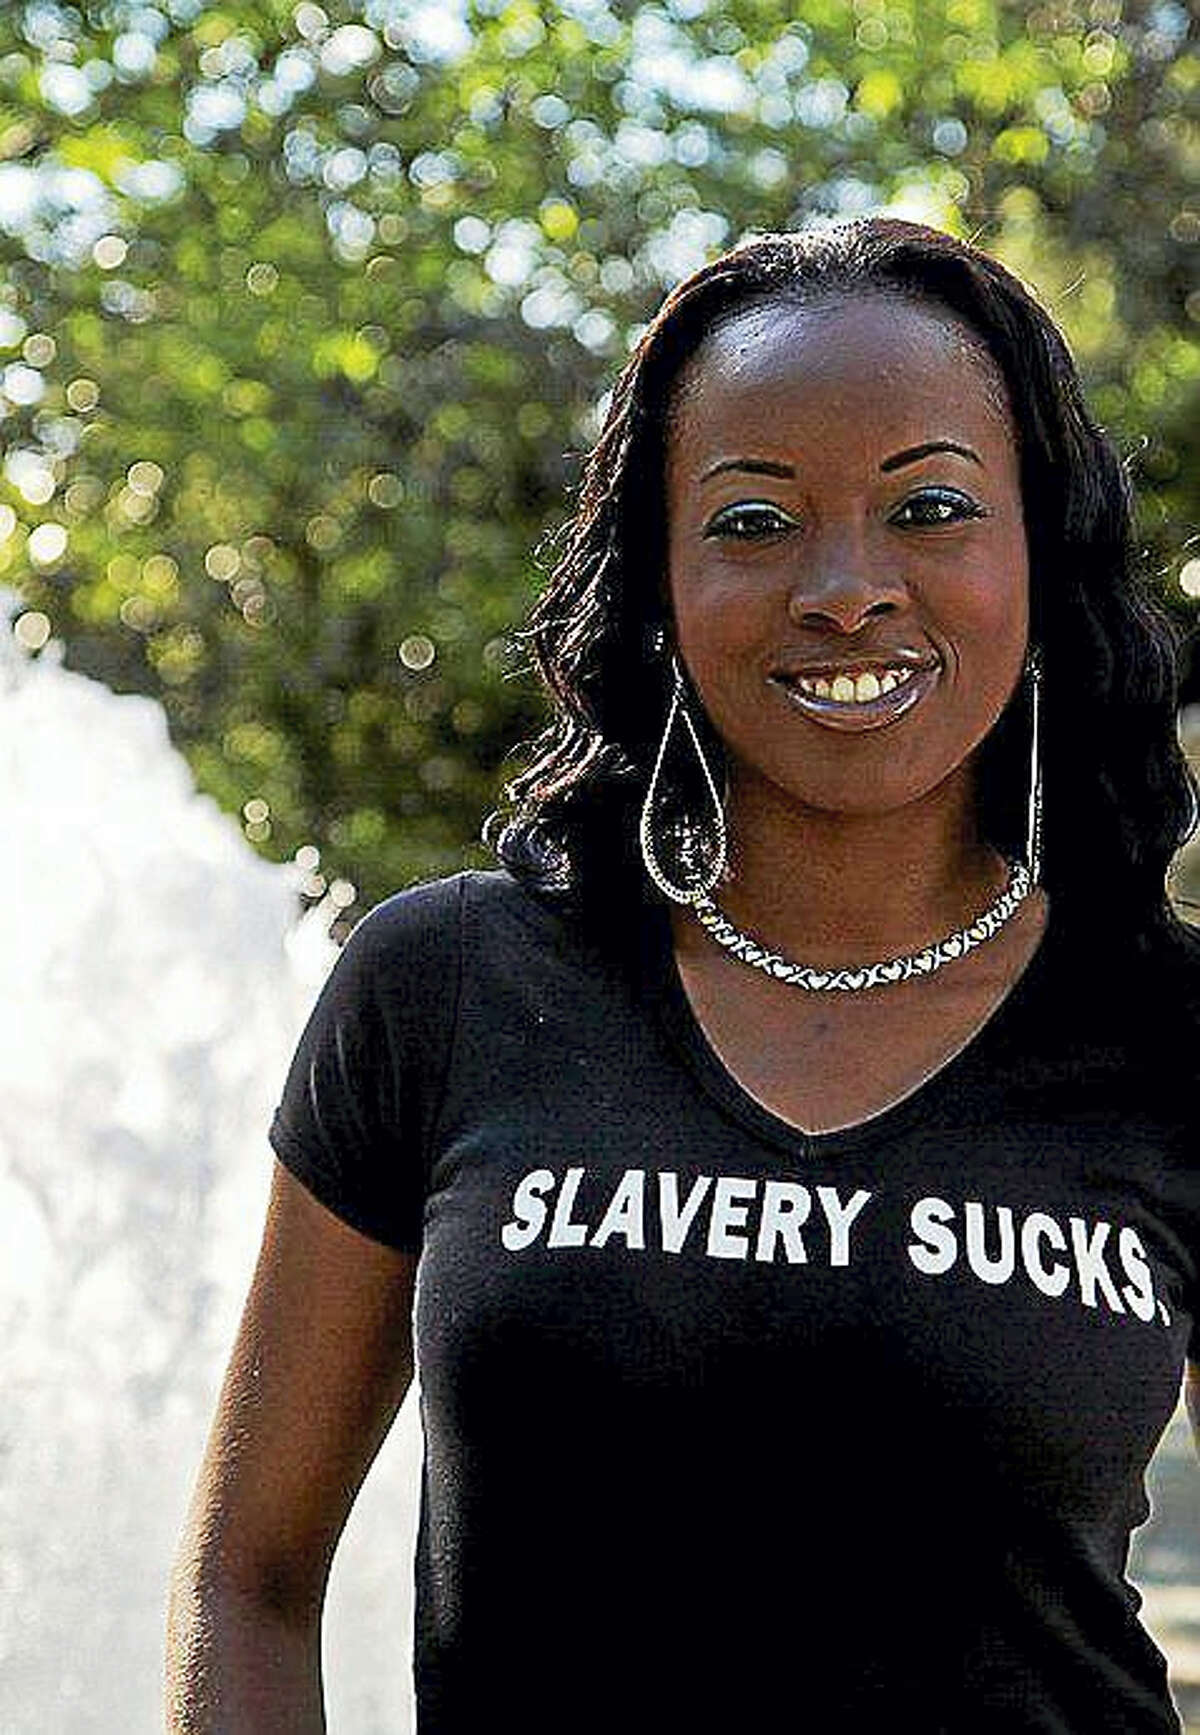 Shamere McKenzie, 32, was charged with conspiracy to commit sex trafficking of minors in January 2007. While she accepted responsibility for her actions, McKenzie also touts the story of a survivor, or a woman who was victimized by a pimp and forced to do his bidding. She is now an advocate for survivors of human trafficking.